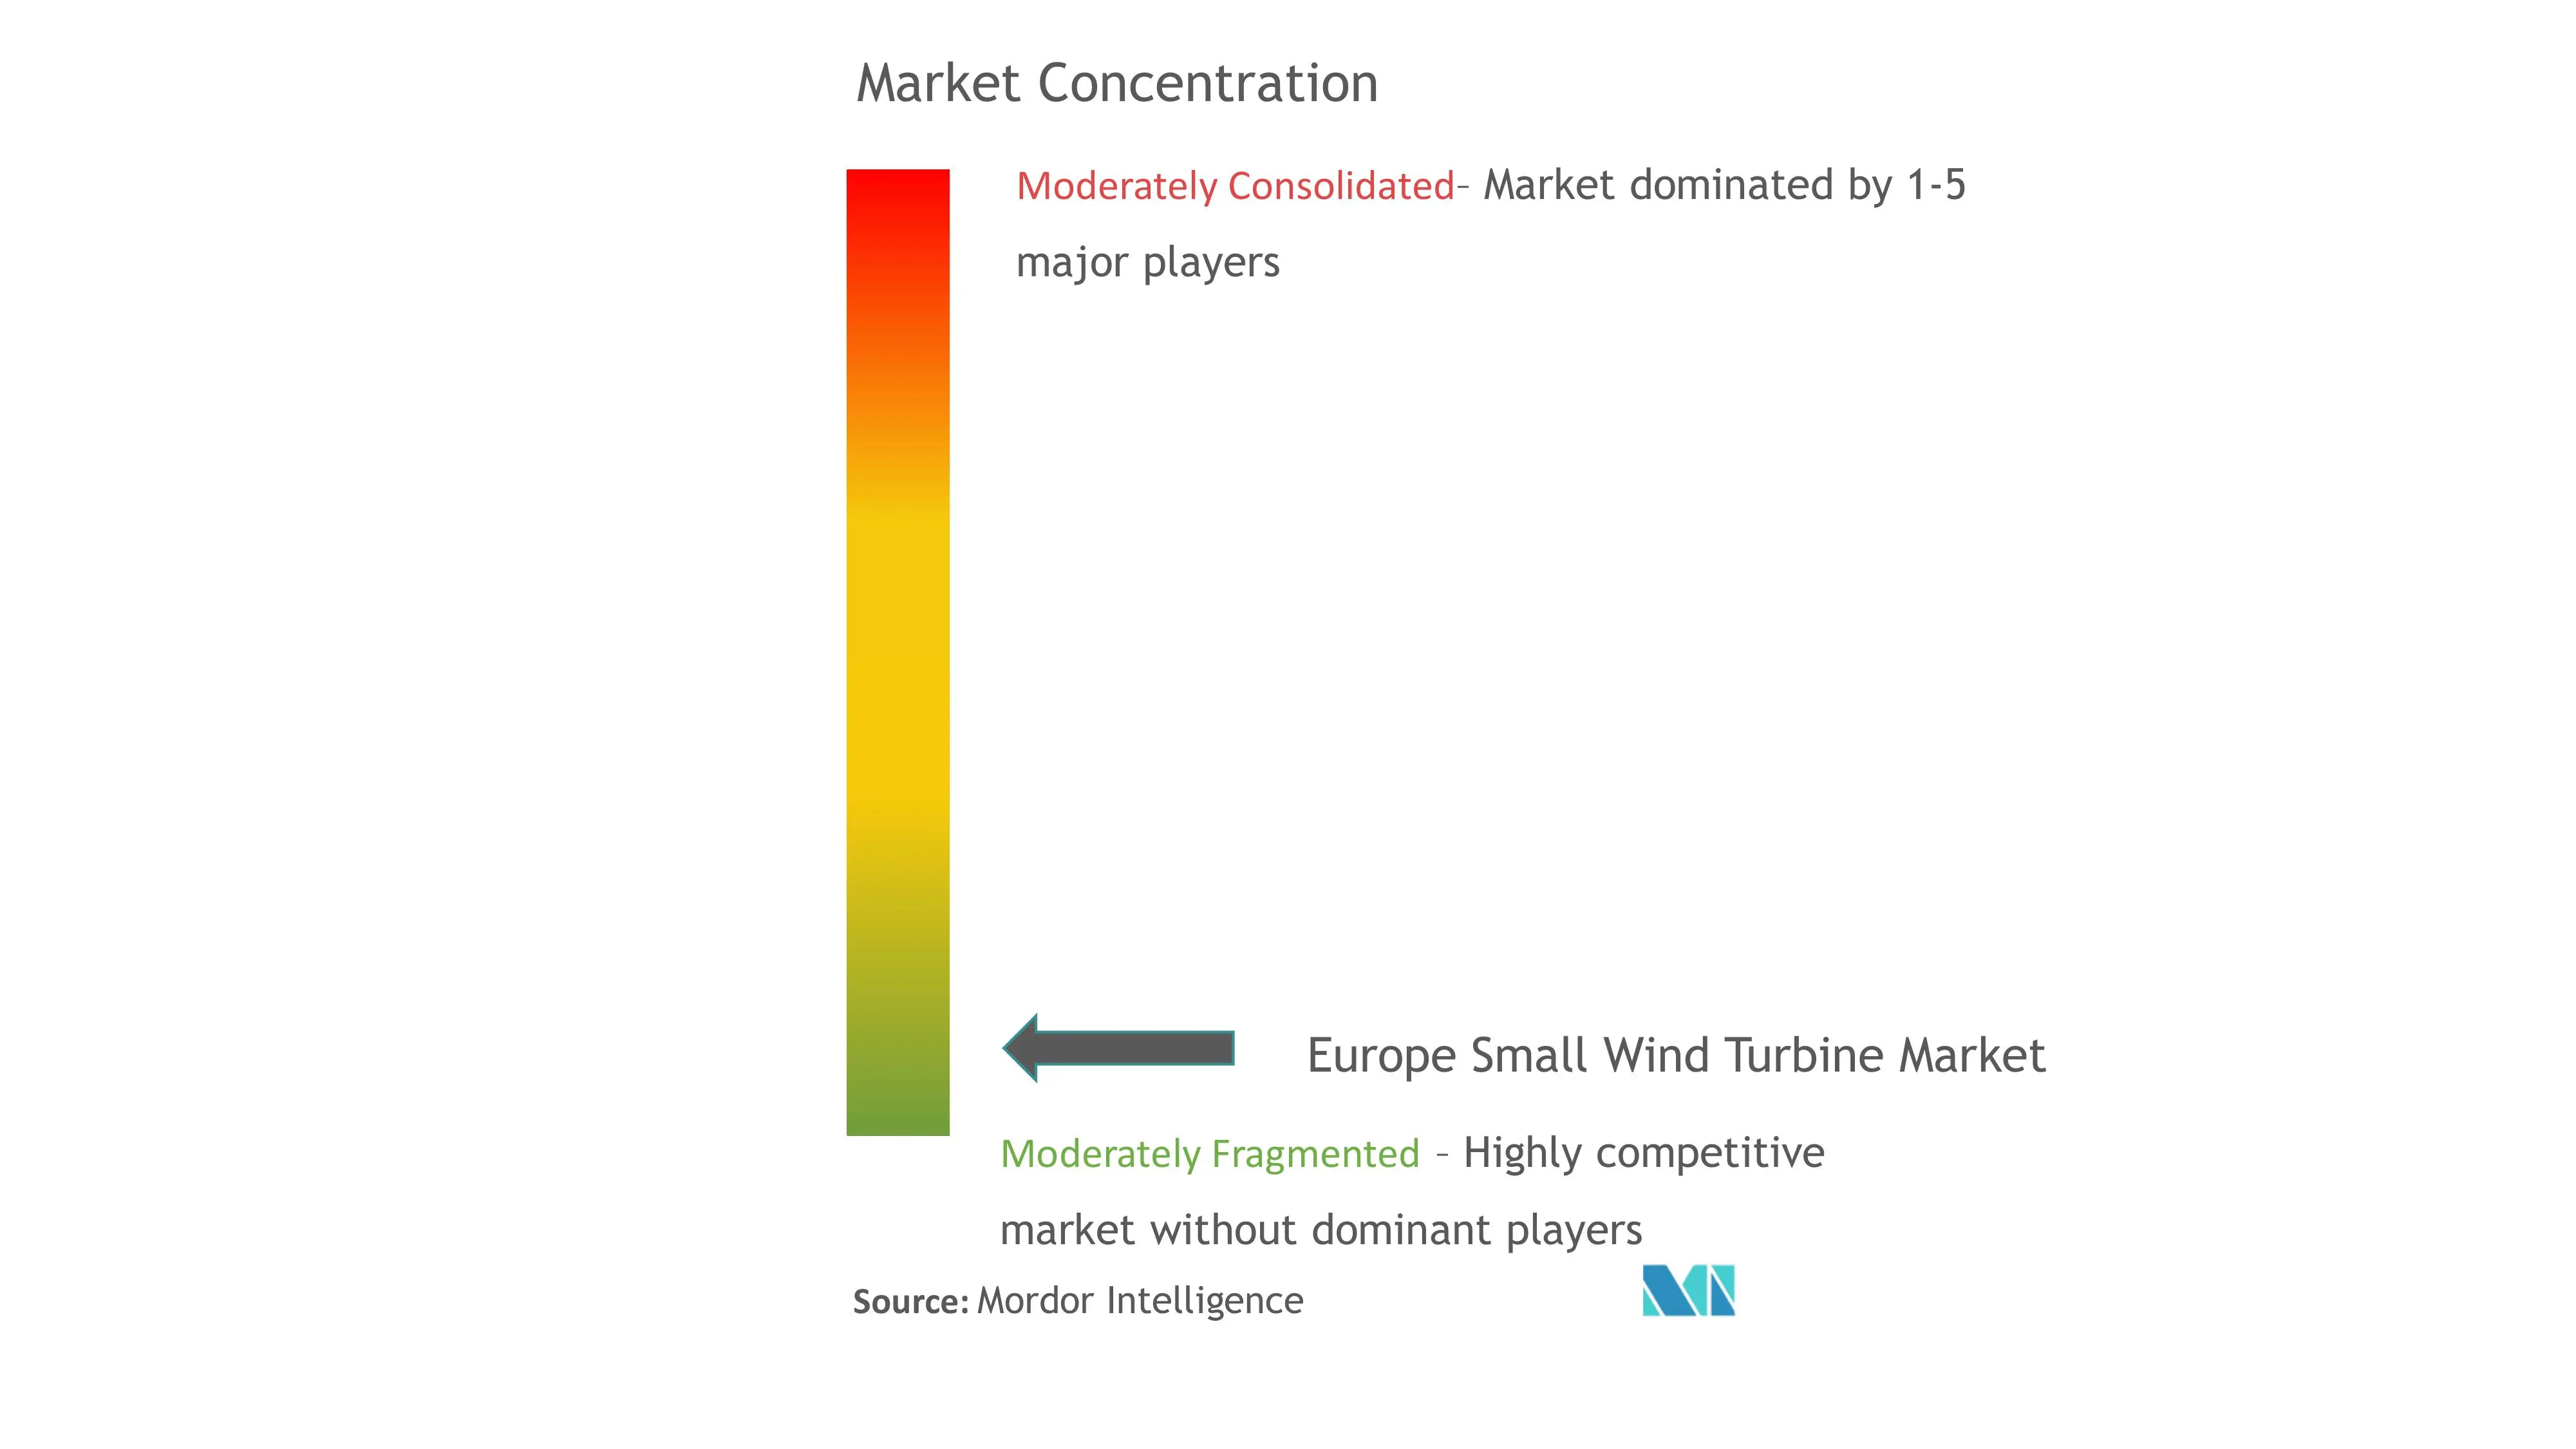 Europe Small Wind Turbine Market Concentration